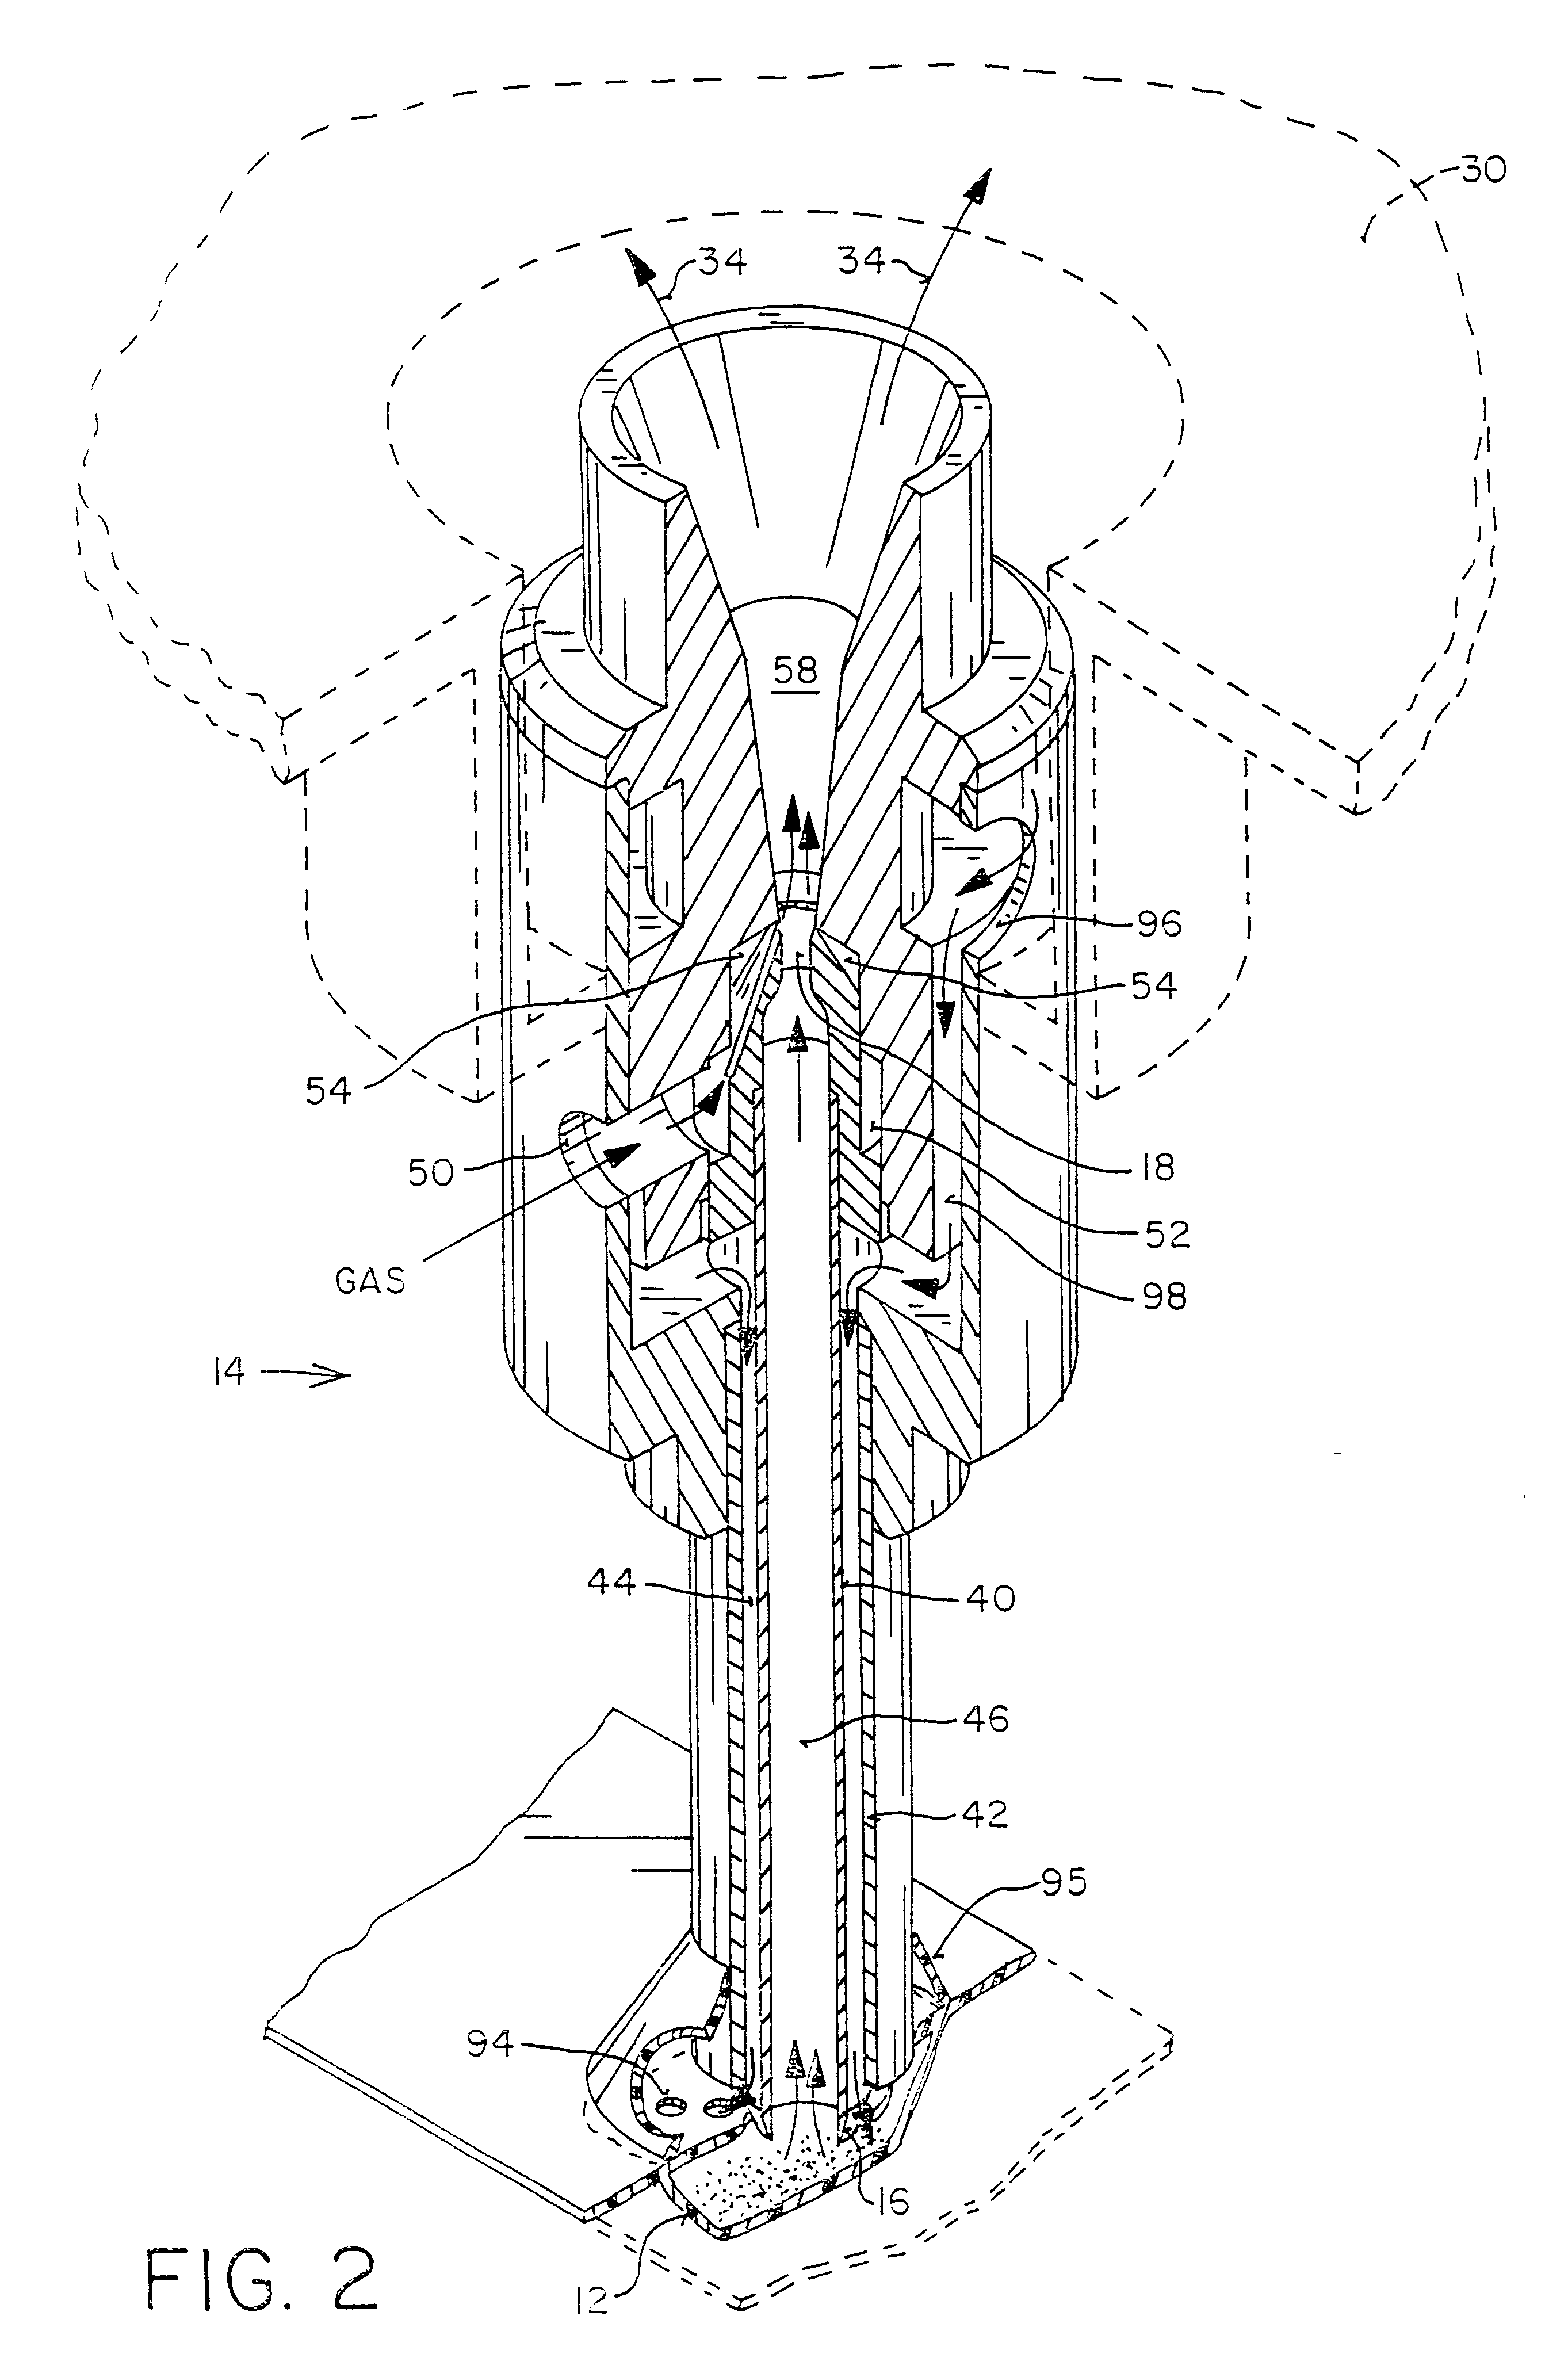 Apparatus and methods for dispersing dry powder medicaments